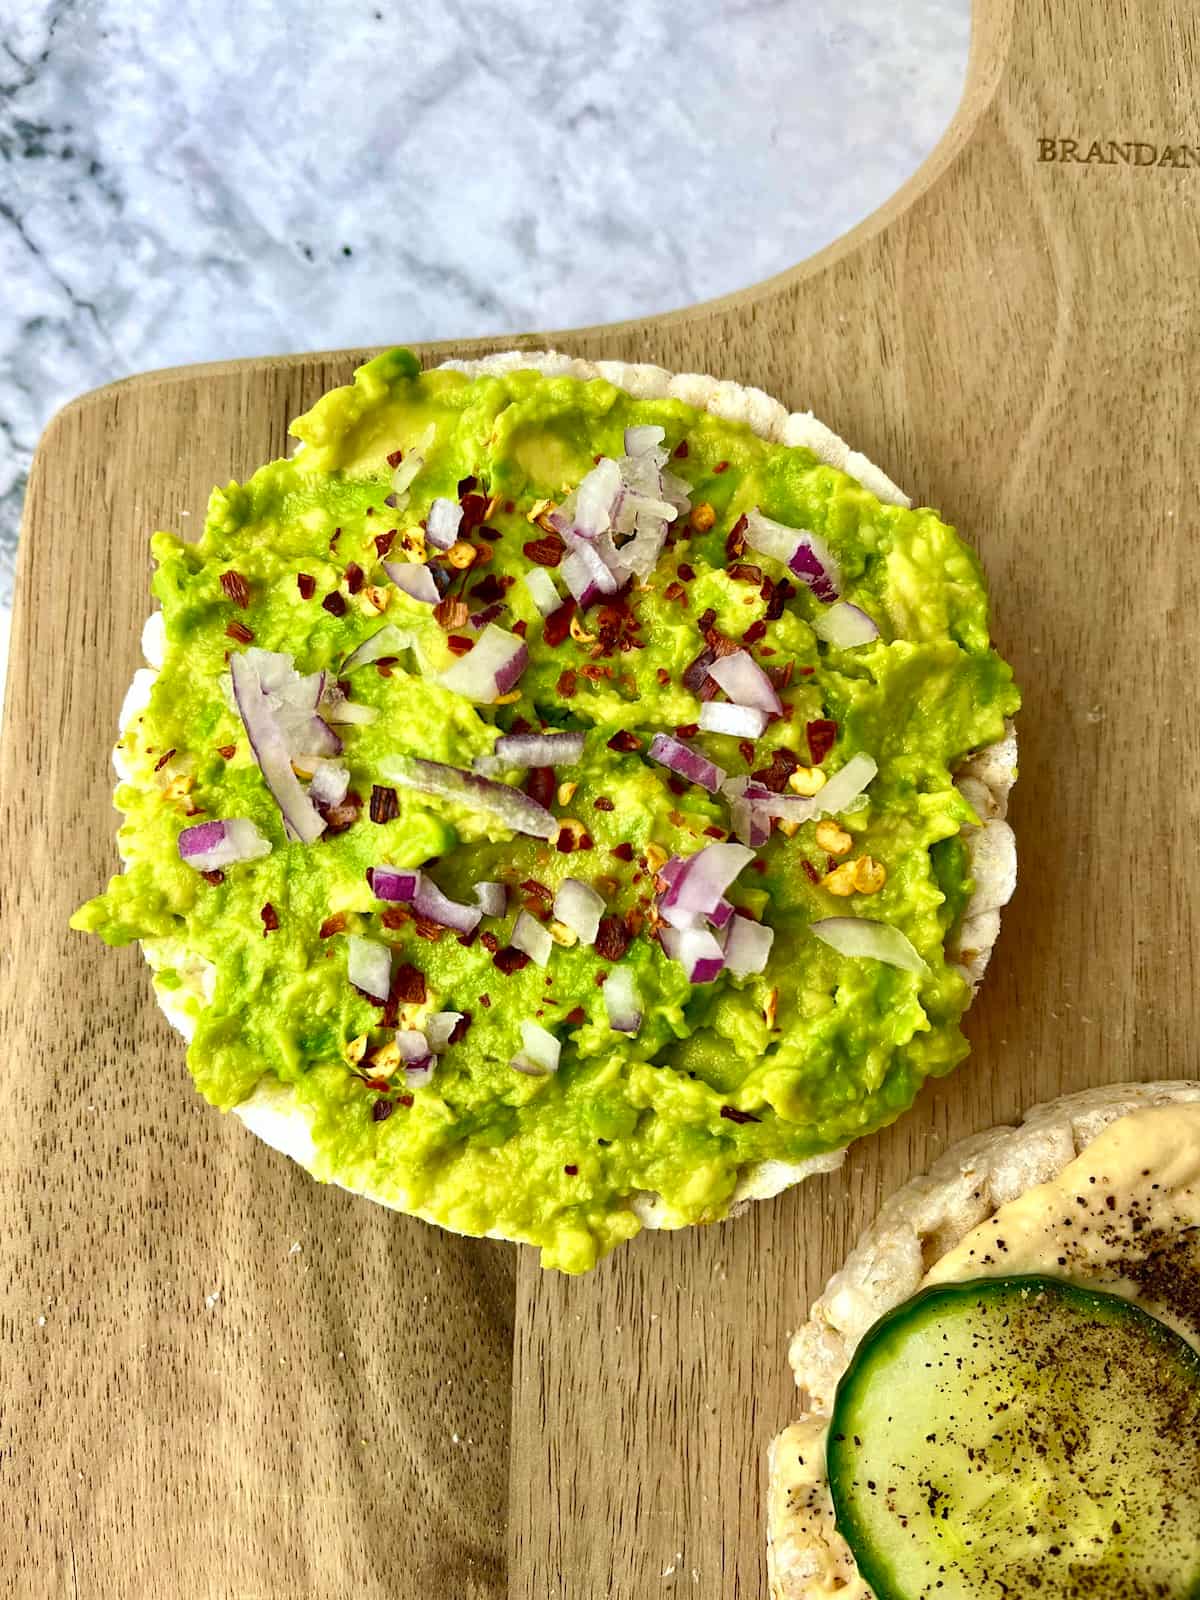 A rice cake topped with mashed avocado, red onion, and crushed red pepper.